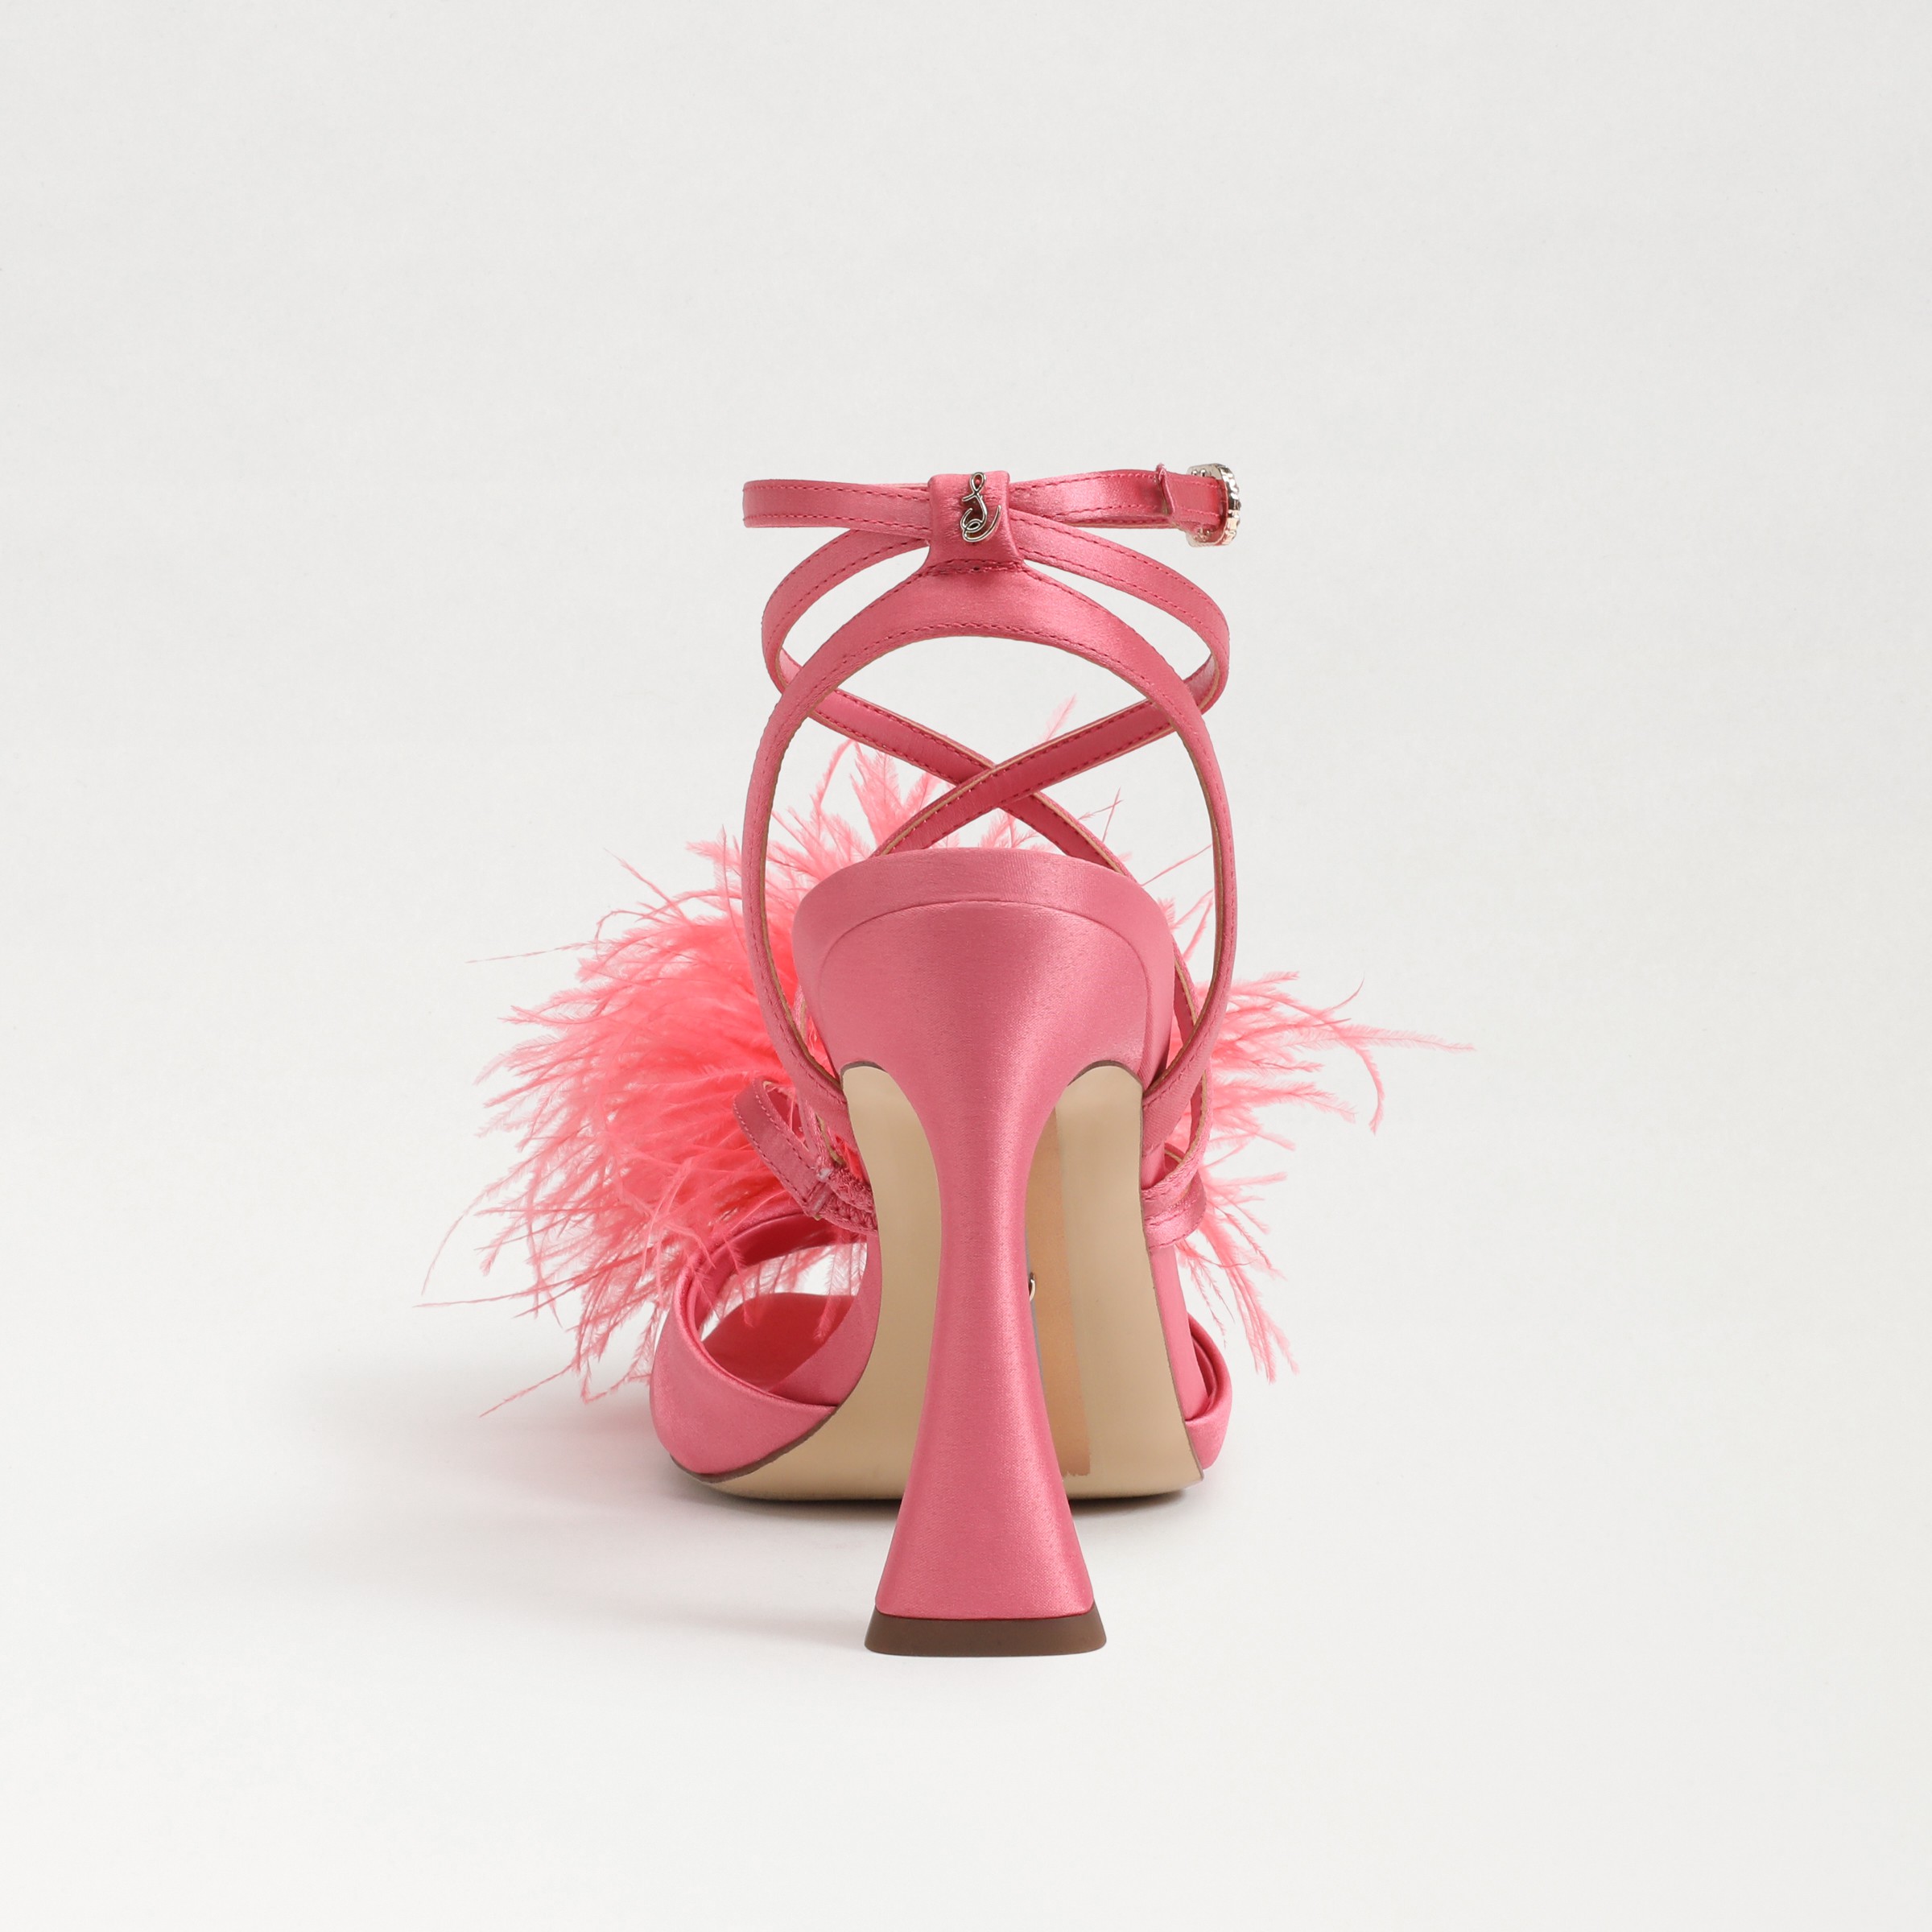 High Heels Ostrich Feathers | Feather Gladiator Sandals | Feather High Heels  Shoes - Women's Sandals - Aliexpress